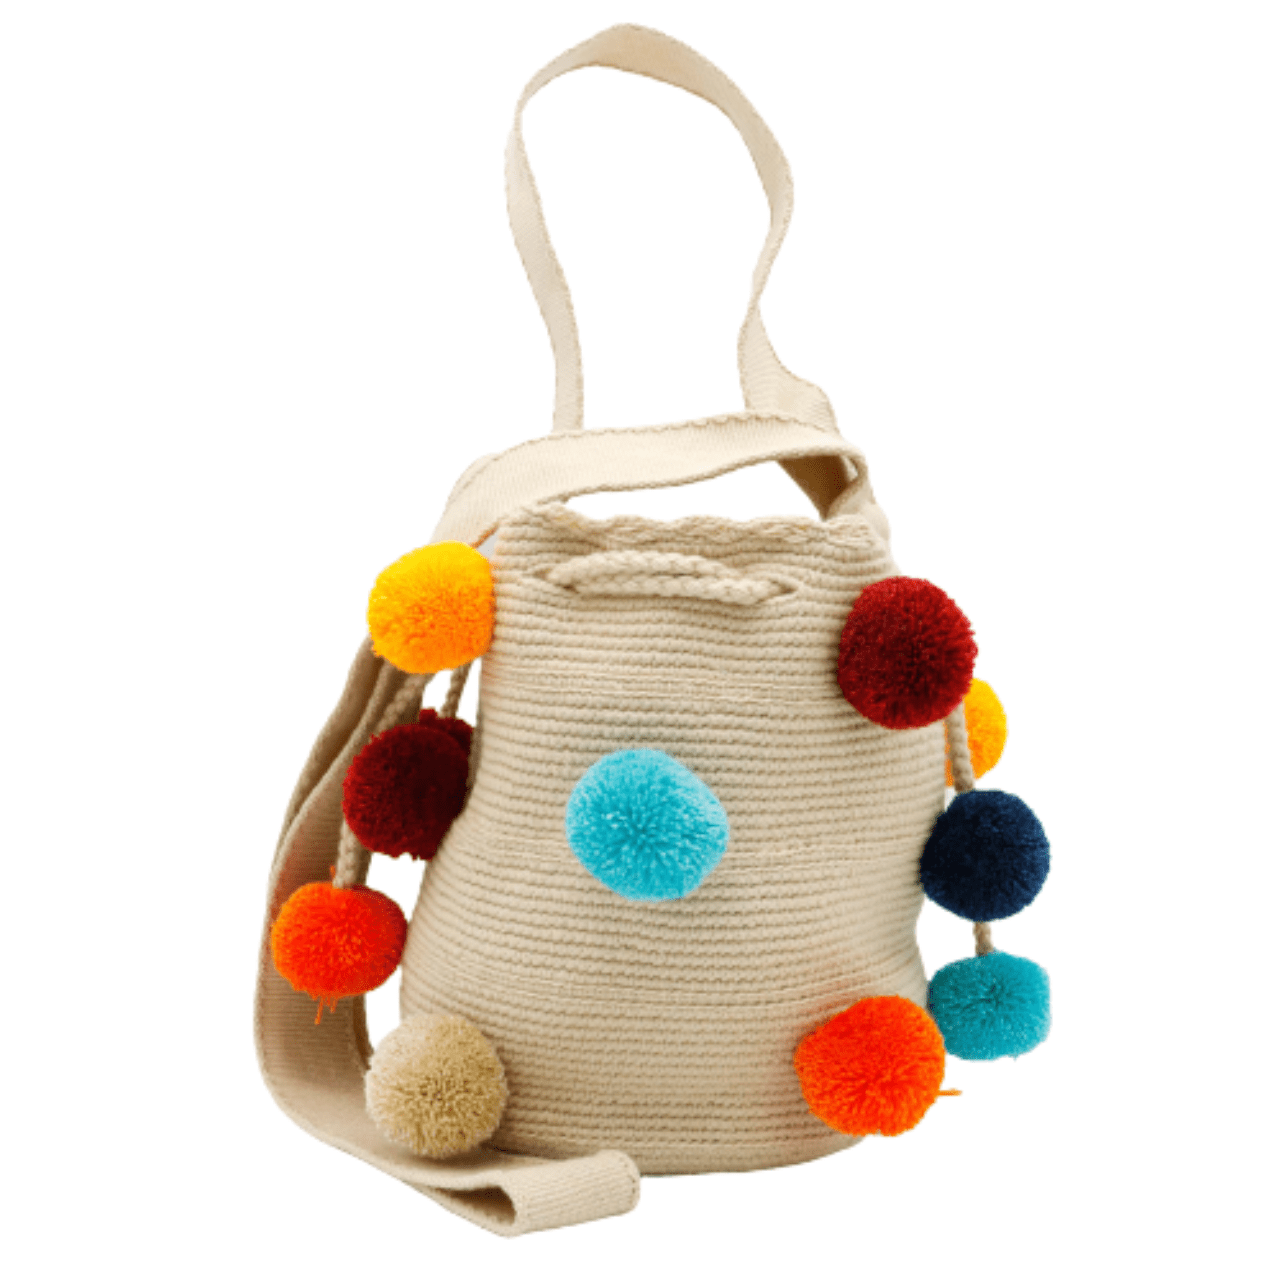  Koya crochet bag Medium in beige color with vibrant pom poms, a stylish and eye-catching accessory.